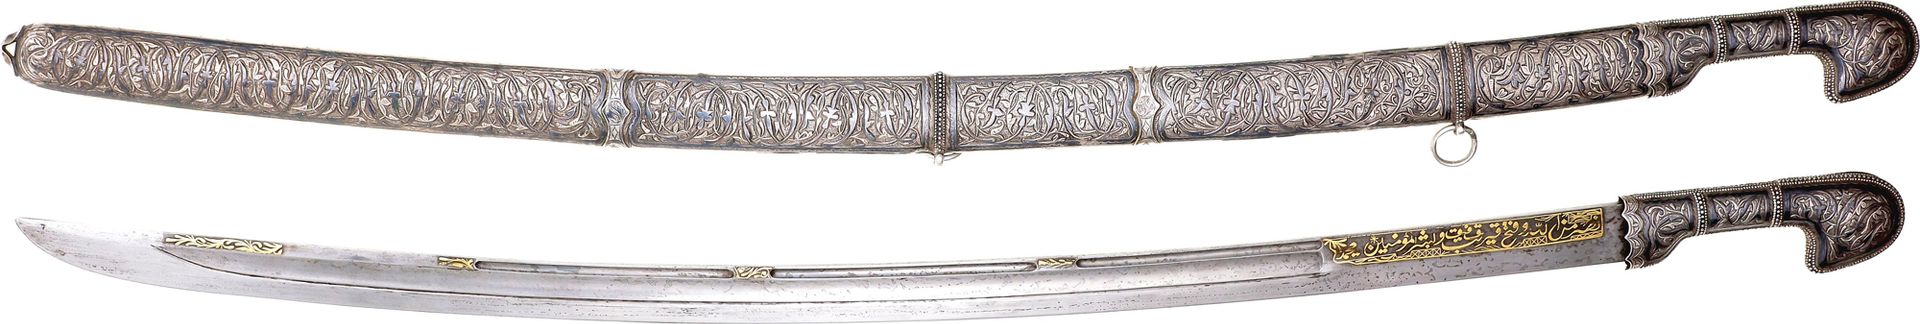 Russia Officer's Saber of the Caucasian Type 19 - th Century Offizierssäbel des &hellip;